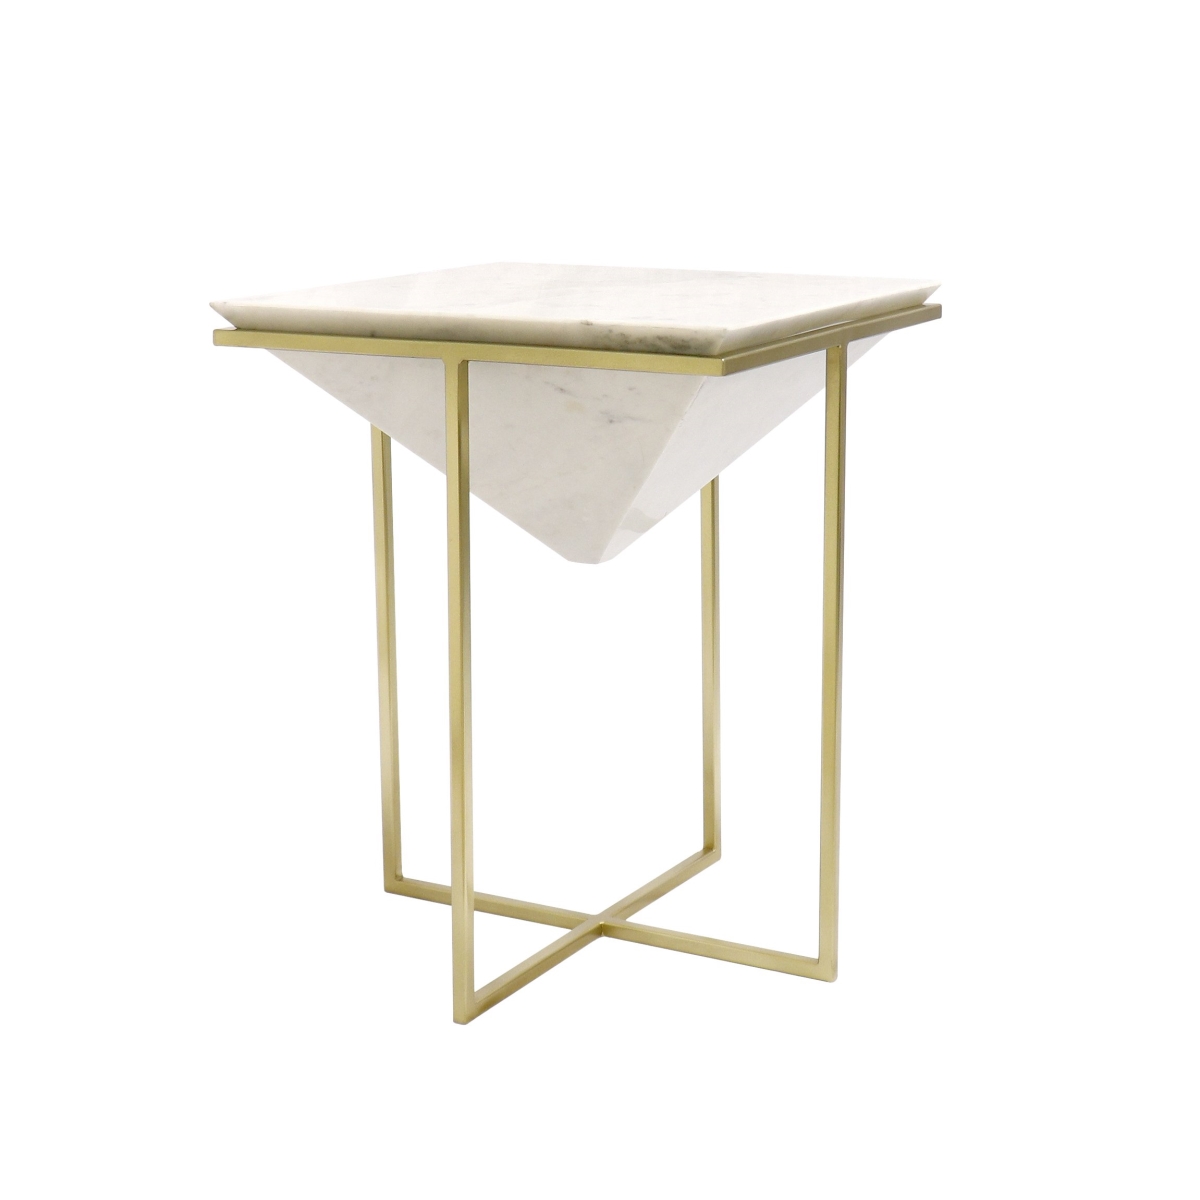 Pasf-147 Perama Side Table, Stainless Steel Frame With Marble Top